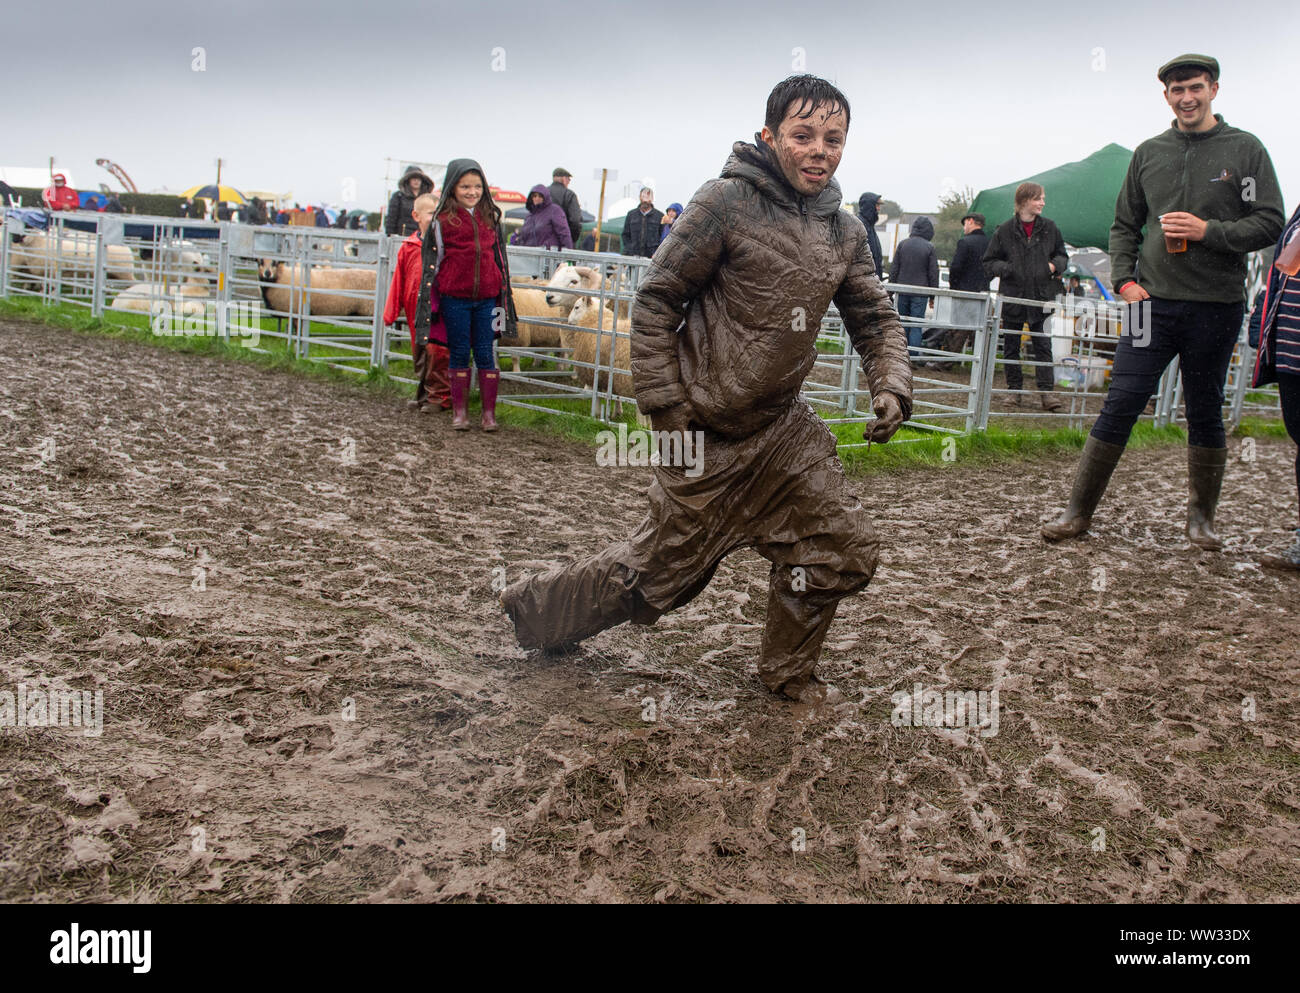 Kendal, Cumbria, UK. 12th Sep 2019. The weather conditions didnt dampen the spirits of everyone at the Westmorland County show, Kendal, Cumbria, as this young lad showed, enjoying a mud slide. Not sure his parents enjoyed it as much as he did! Credit: Wayne HUTCHINSON/Alamy Live News Stock Photo